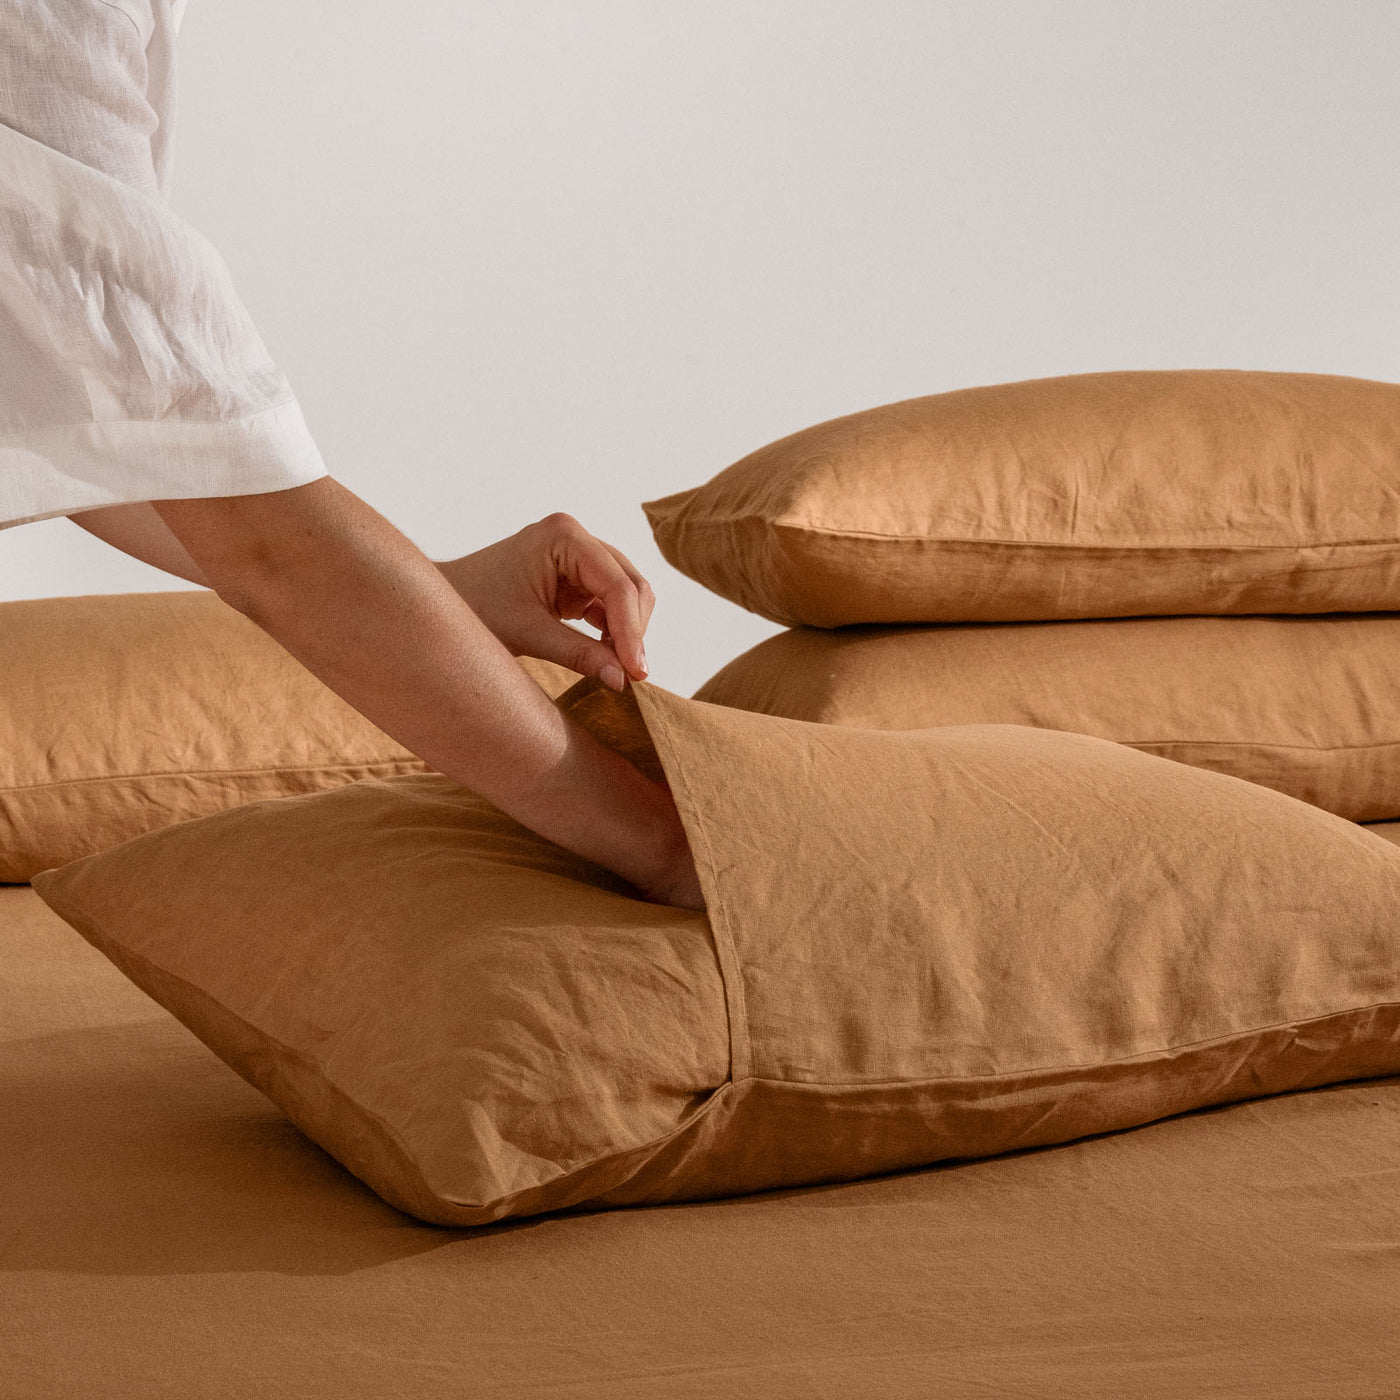 French Flax Linen Quilt Cover Set in Sandalwood